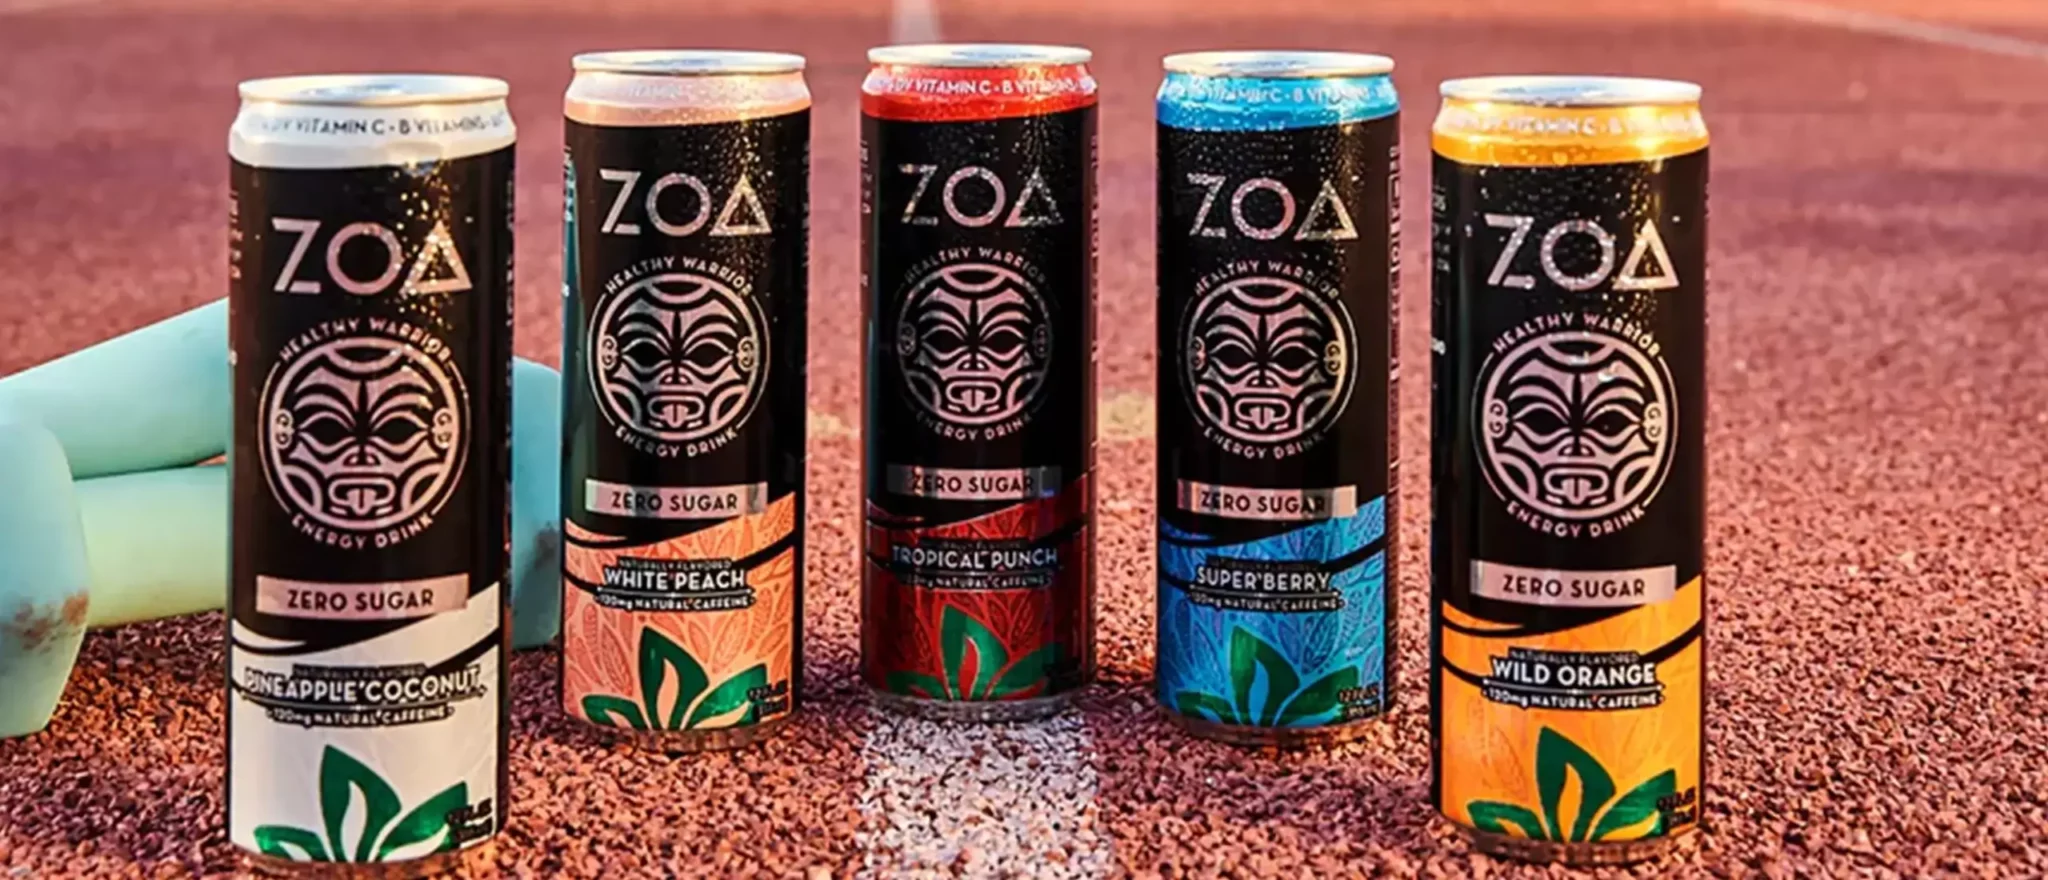 Our Review of ZOA—The Rock’s Energy Drink